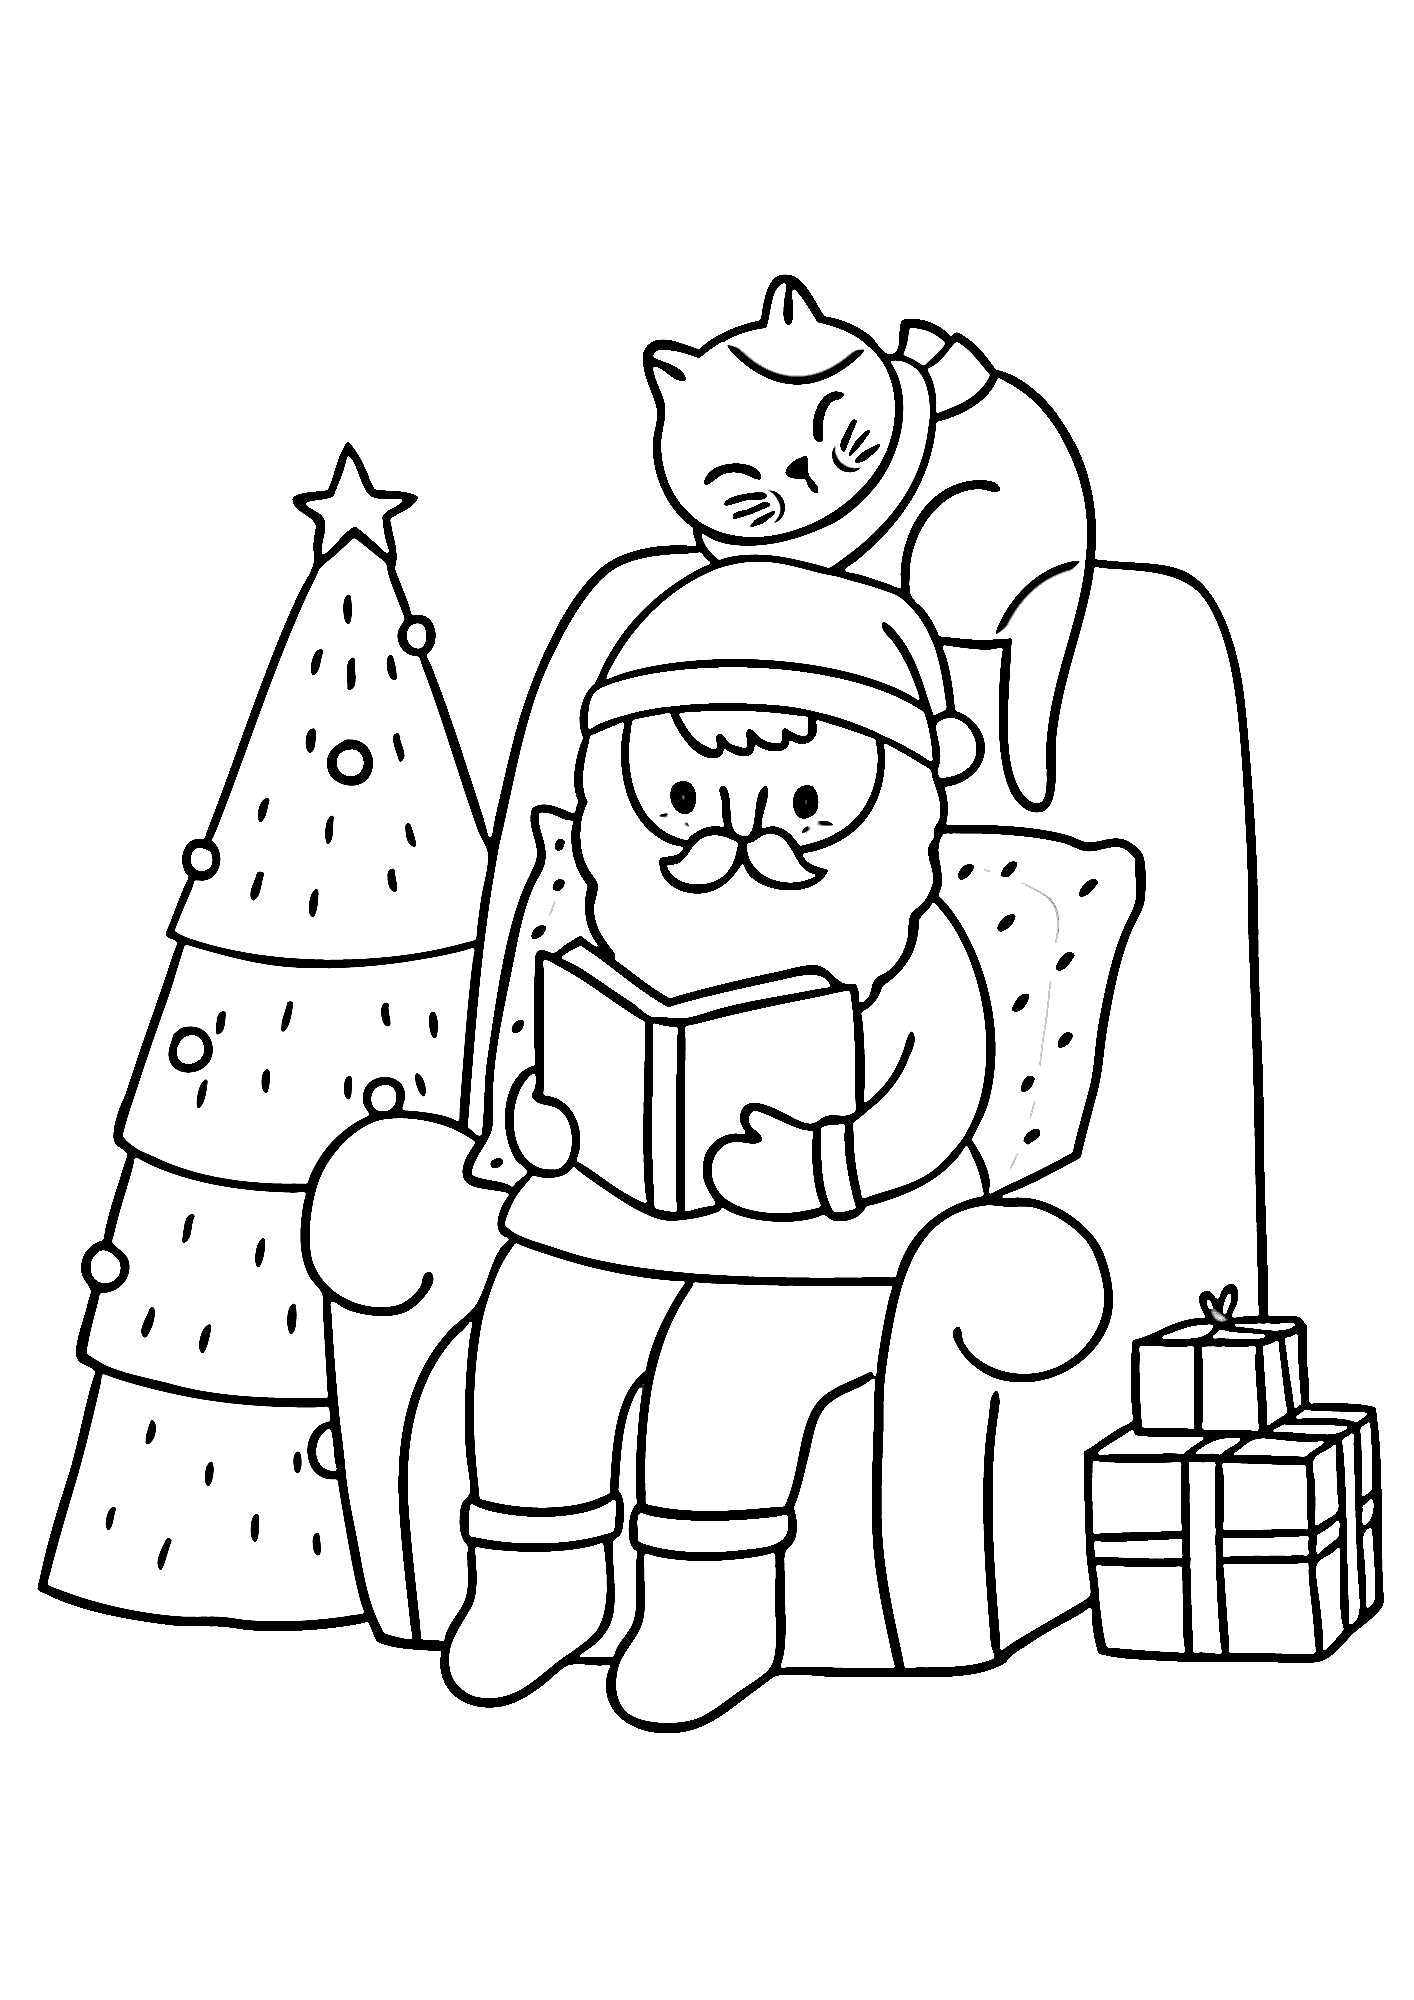 Happy Christmas Tree Coloring Pages